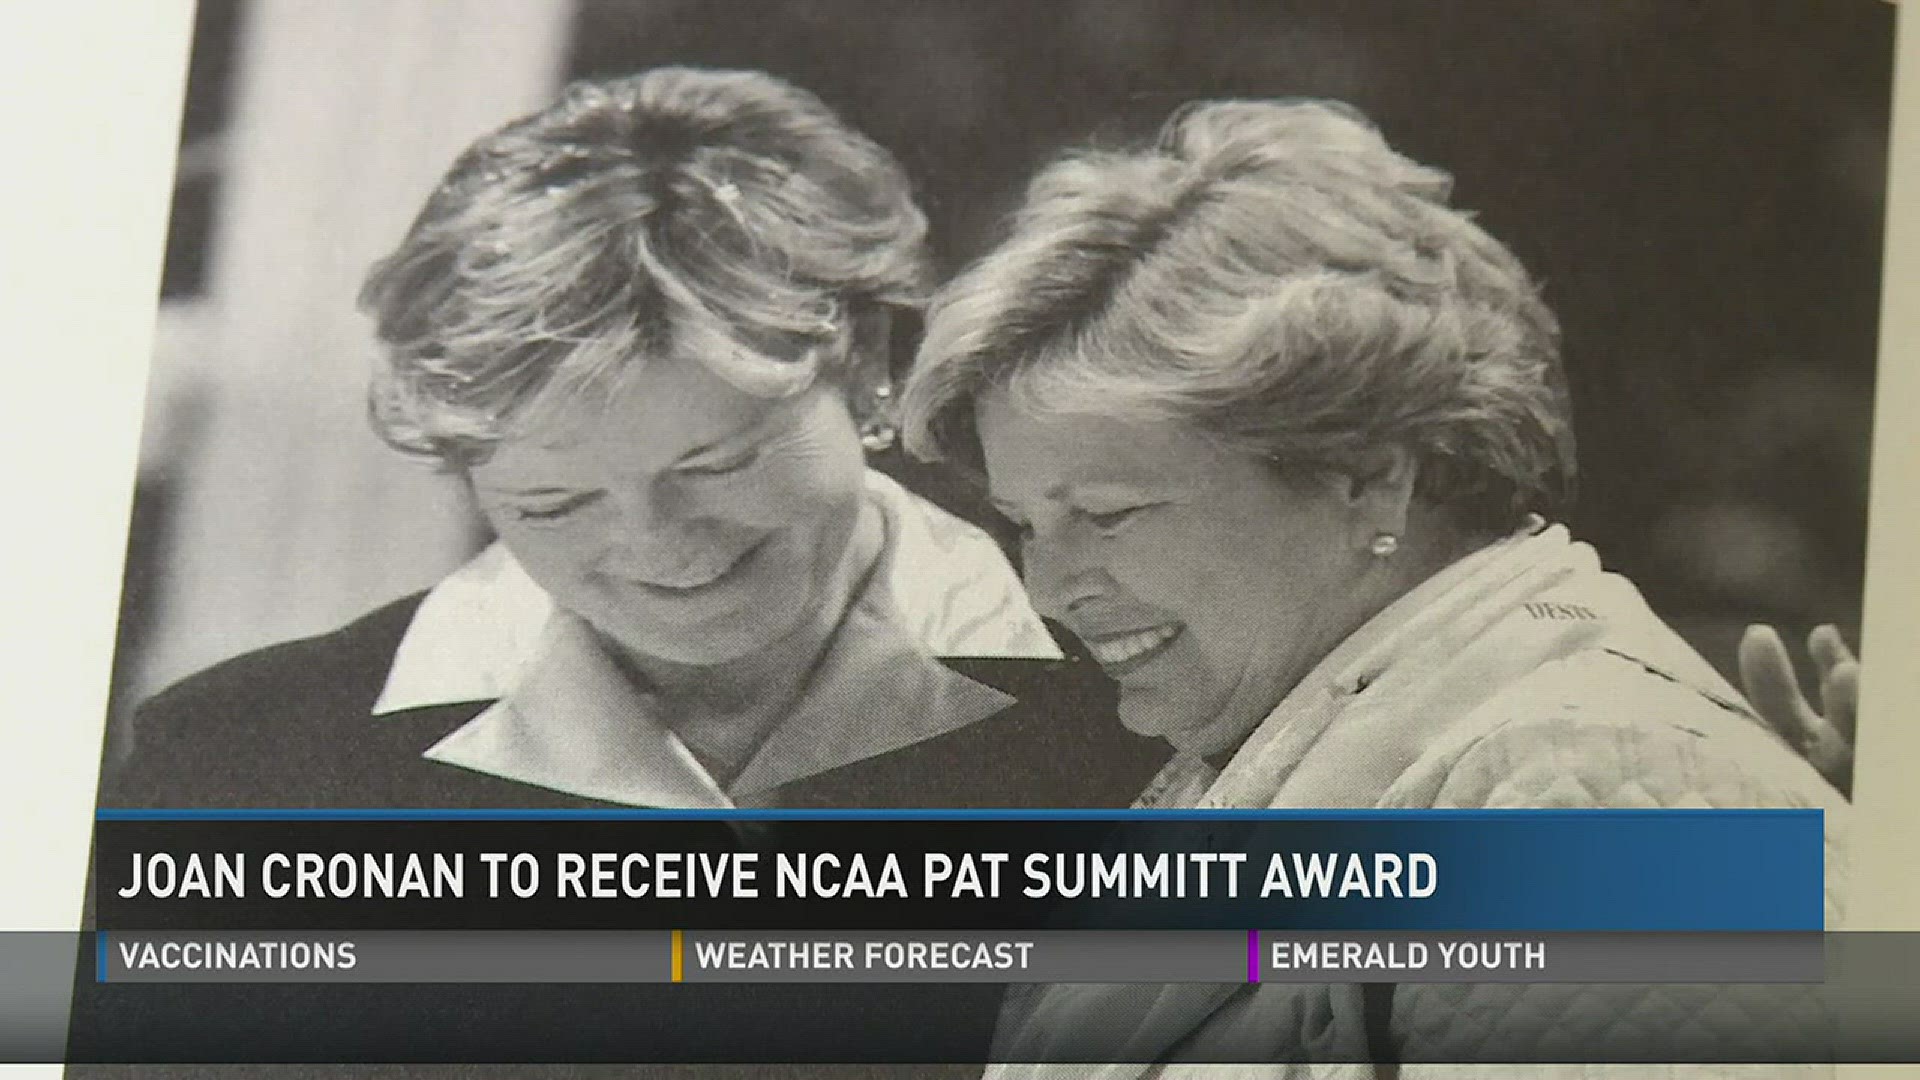 Jan. 11, 2017: The director of the Pat Summitt Foundation says Joan Cronan is the perfect choice to be the first recipient of an NCAA award created in the memory of Pat Summitt.